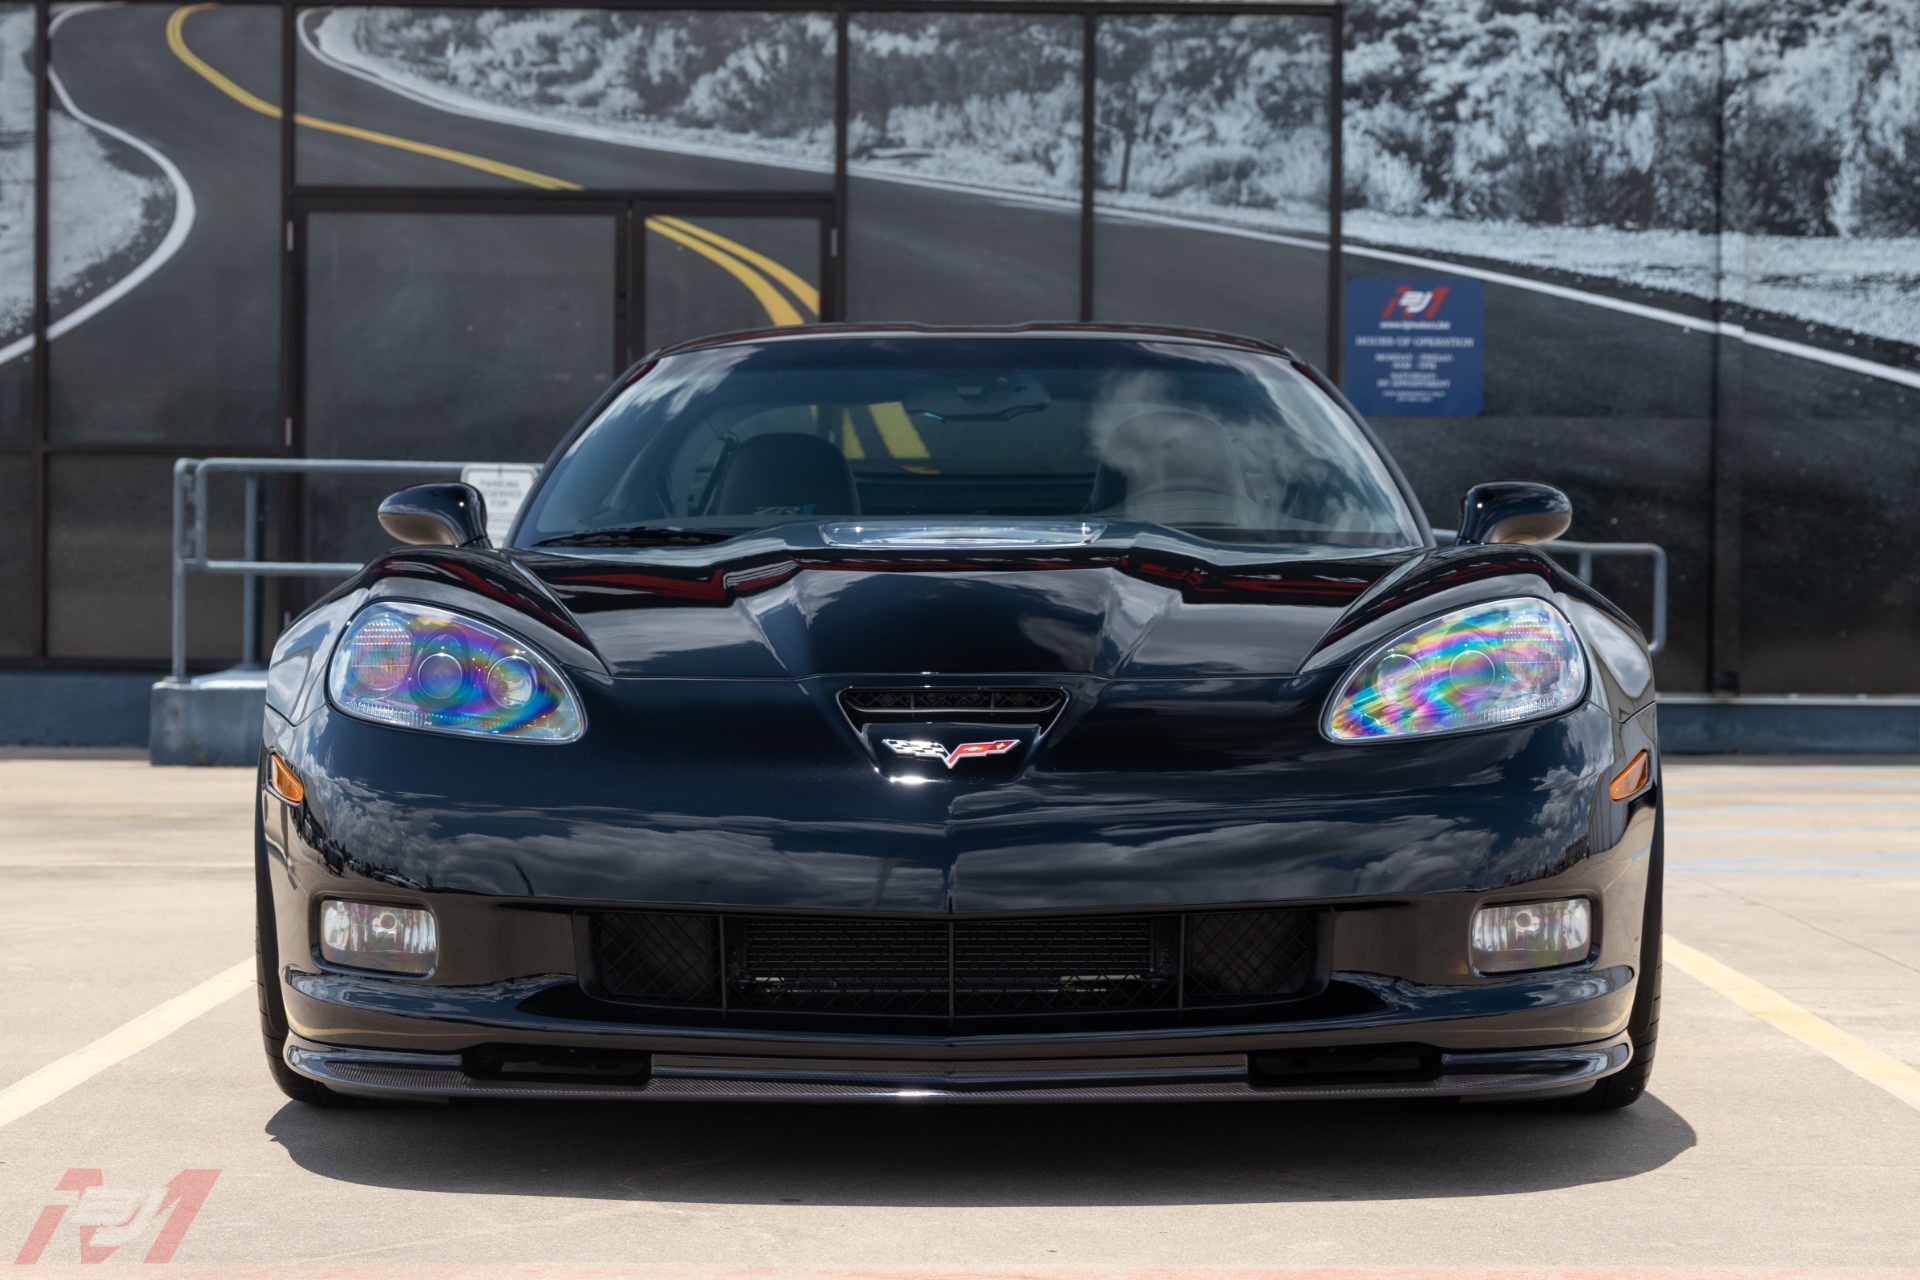 Used 2009 Chevrolet Corvette ZR1 3ZR For Sale (Special Pricing) | BJ ...